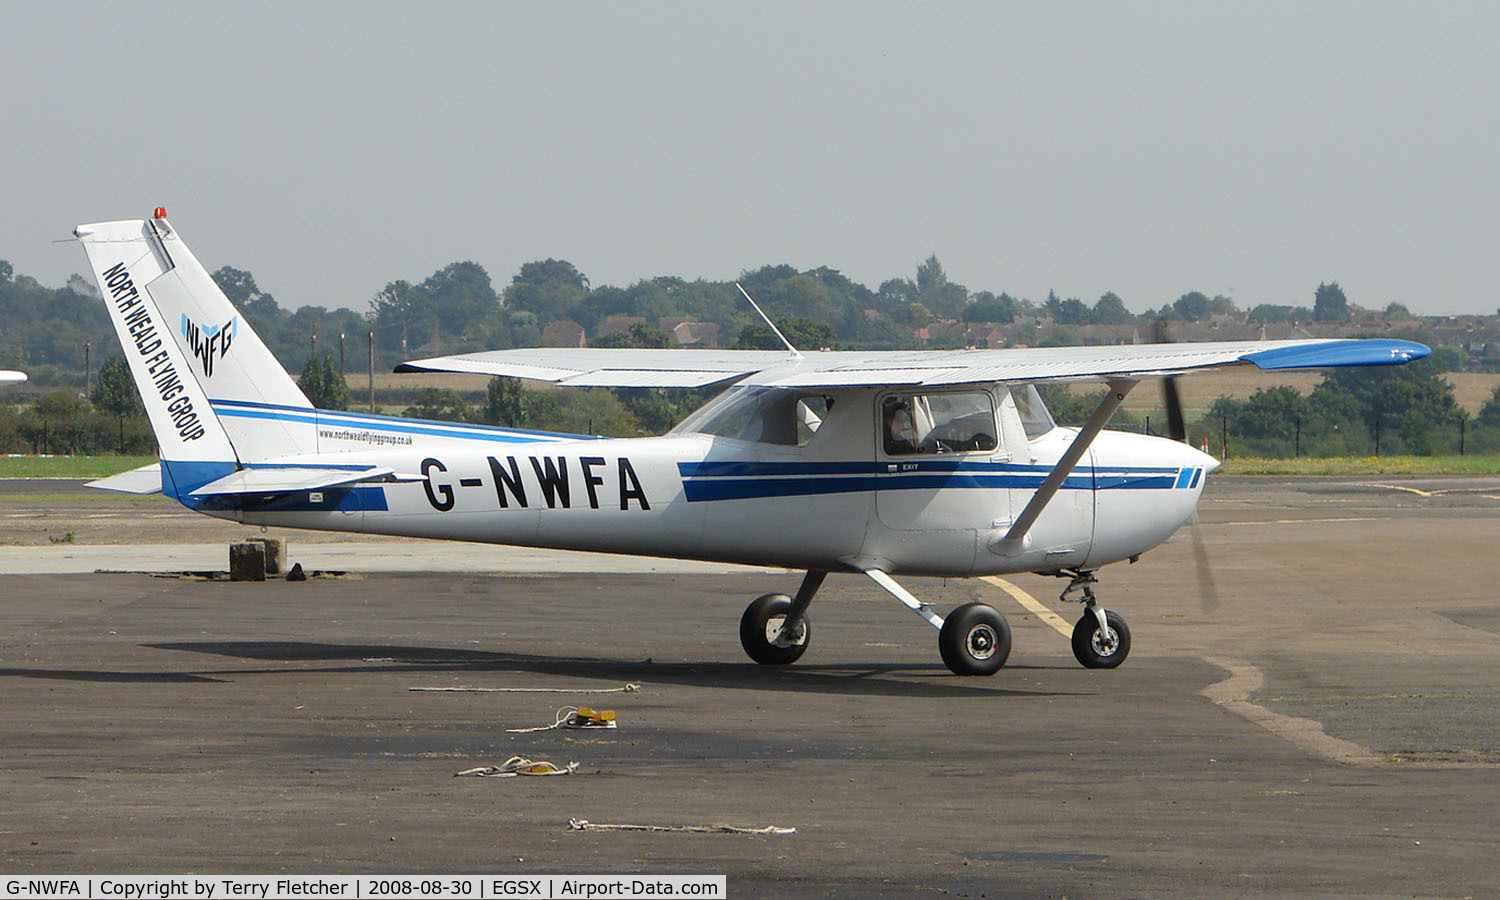 G-NWFA, 1975 Cessna 150M C/N 150-76736, Cessna of the North Weald Flying Club